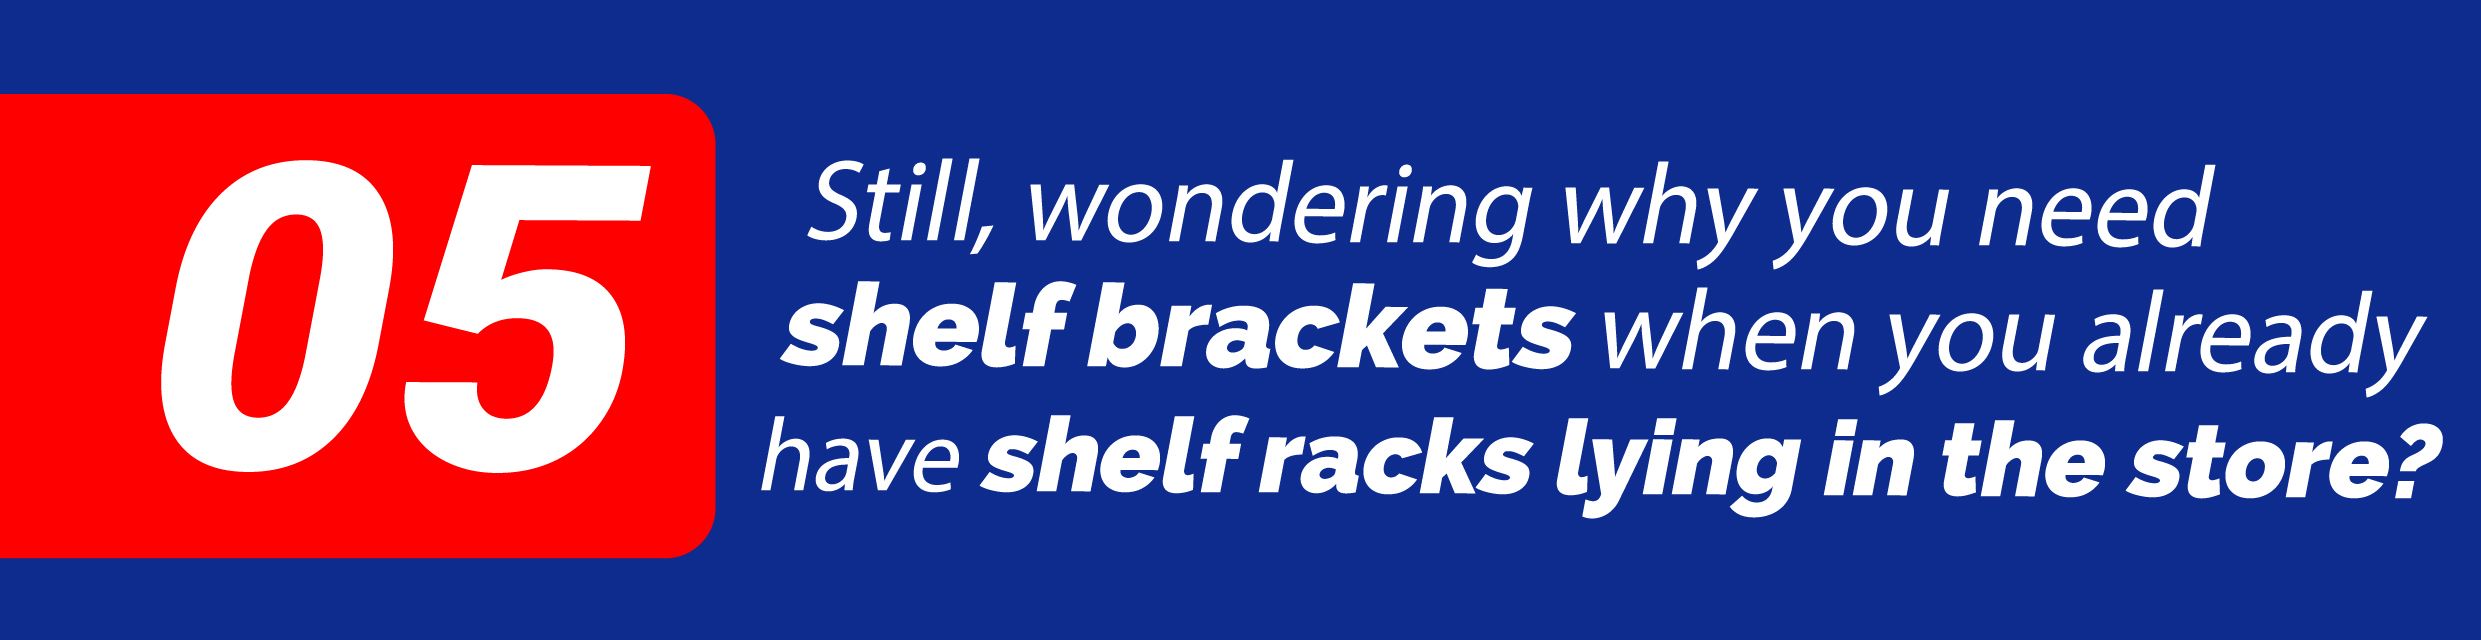 Benefits of Installing Shelf Brackets in Your Store